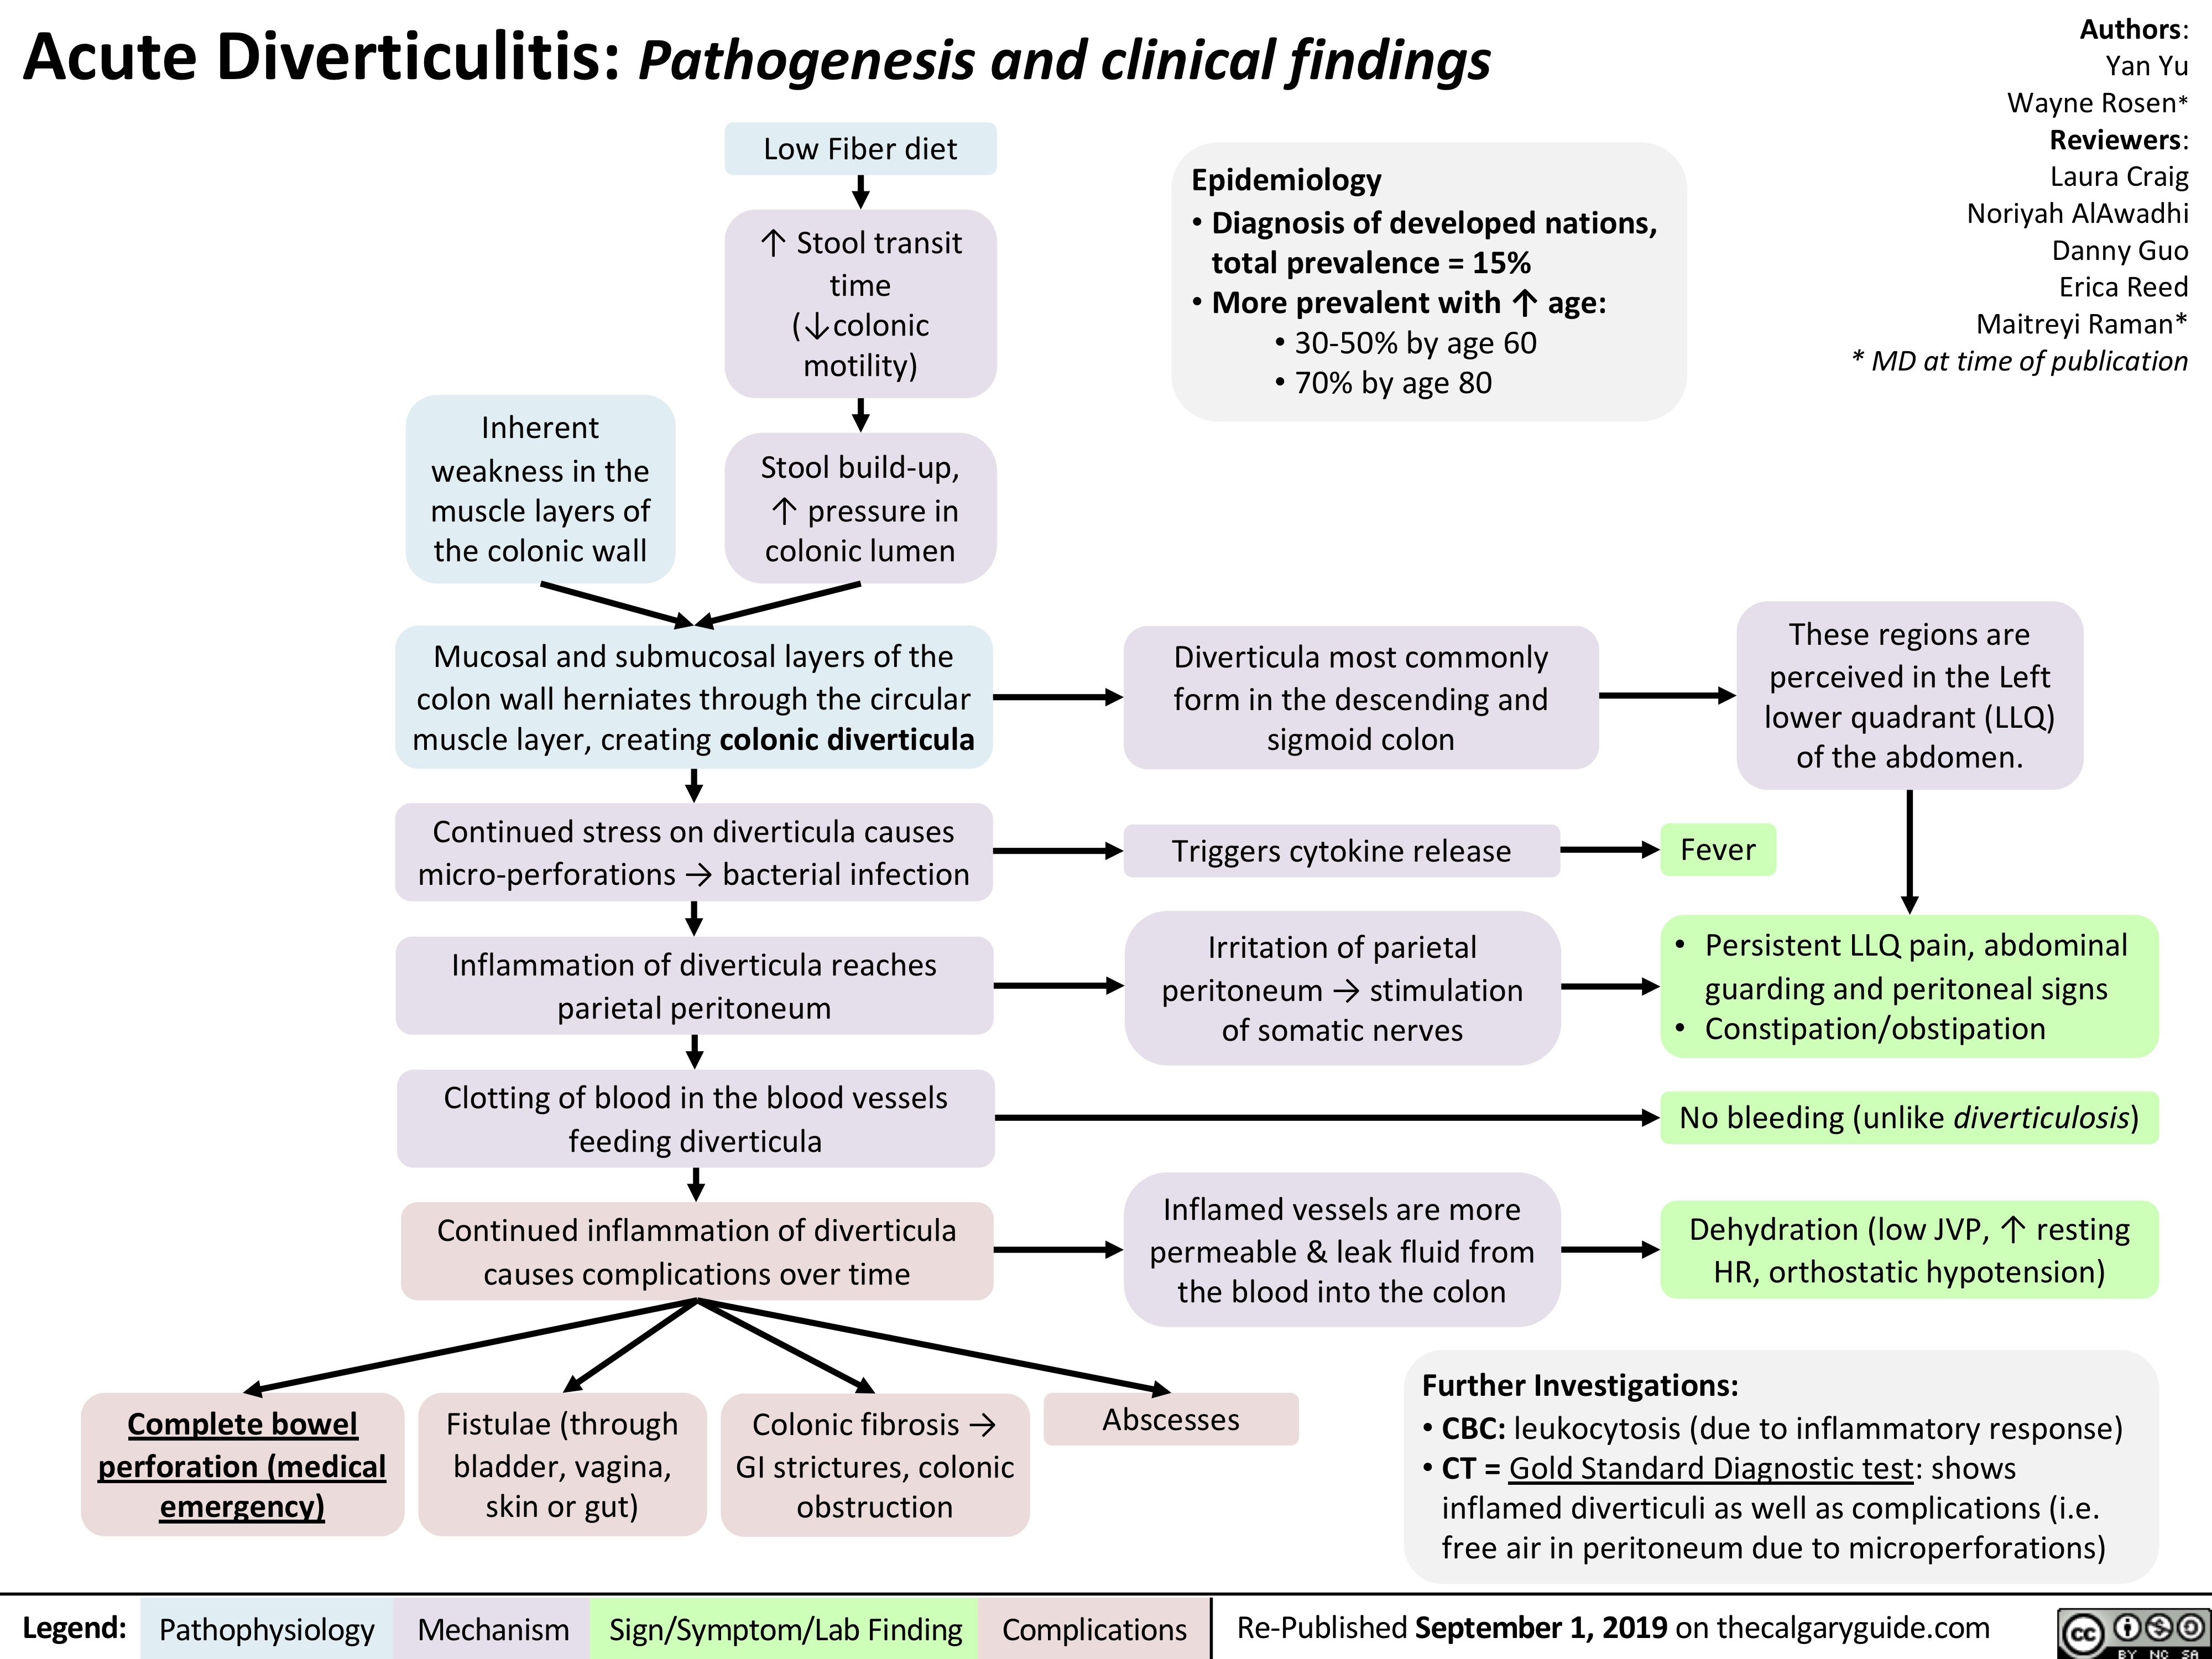 Acute Diverticulitis: Pathogenesis and clinical findings
Authors: Yan Yu Wayne Rosen* Reviewers: Laura Craig Noriyah AlAwadhi Danny Guo Erica Reed Maitreyi Raman* * MD at time of publication
These regions are perceived in the Left lower quadrant (LLQ) of the abdomen.
• PersistentLLQpain,abdominal guarding and peritoneal signs
• Constipation/obstipation
No bleeding (unlike diverticulosis)
Dehydration (low JVP, ↑ resting HR, orthostatic hypotension)
      Inherent weakness in the muscle layers of the colonic wall
Low Fiber diet
↑ Stool transit time (↓colonic motility)
Stool build-up, ↑ pressure in colonic lumen
Epidemiology
• Diagnosis of developed nations,
total prevalence = 15%
• More prevalent with ↑ age:
• 30-50% by age 60 • 70% by age 80
Diverticula most commonly form in the descending and sigmoid colon
Triggers cytokine release
Irritationofparietal peritoneum → stimulation ofsomaticnerves
Inflamed vessels are more permeable & leak fluid from the blood into the colon
      Mucosal and submucosal layers of the colon wall herniates through the circular muscle layer, creating colonic diverticula
Continued stress on diverticula causes micro-perforations → bacterial infection
Inflammation of diverticula reaches parietal peritoneum
Clotting of blood in the blood vessels feeding diverticula
Continued inflammation of diverticula causes complications over time
Fever
                               Complete bowel perforation (medical emergency)
Fistulae (through bladder, vagina, skin or gut)
Colonic fibrosis → GI strictures, colonic obstruction
Abscesses
Further Investigations:
• CBC: leukocytosis (due to inflammatory response) • CT = Gold Standard Diagnostic test: shows
inflamed diverticuli as well as complications (i.e. free air in peritoneum due to microperforations)
   Legend:
 Pathophysiology
 Mechanism
Sign/Symptom/Lab Finding
  Complications
Re-Published September 1, 2019 on thecalgaryguide.com
   